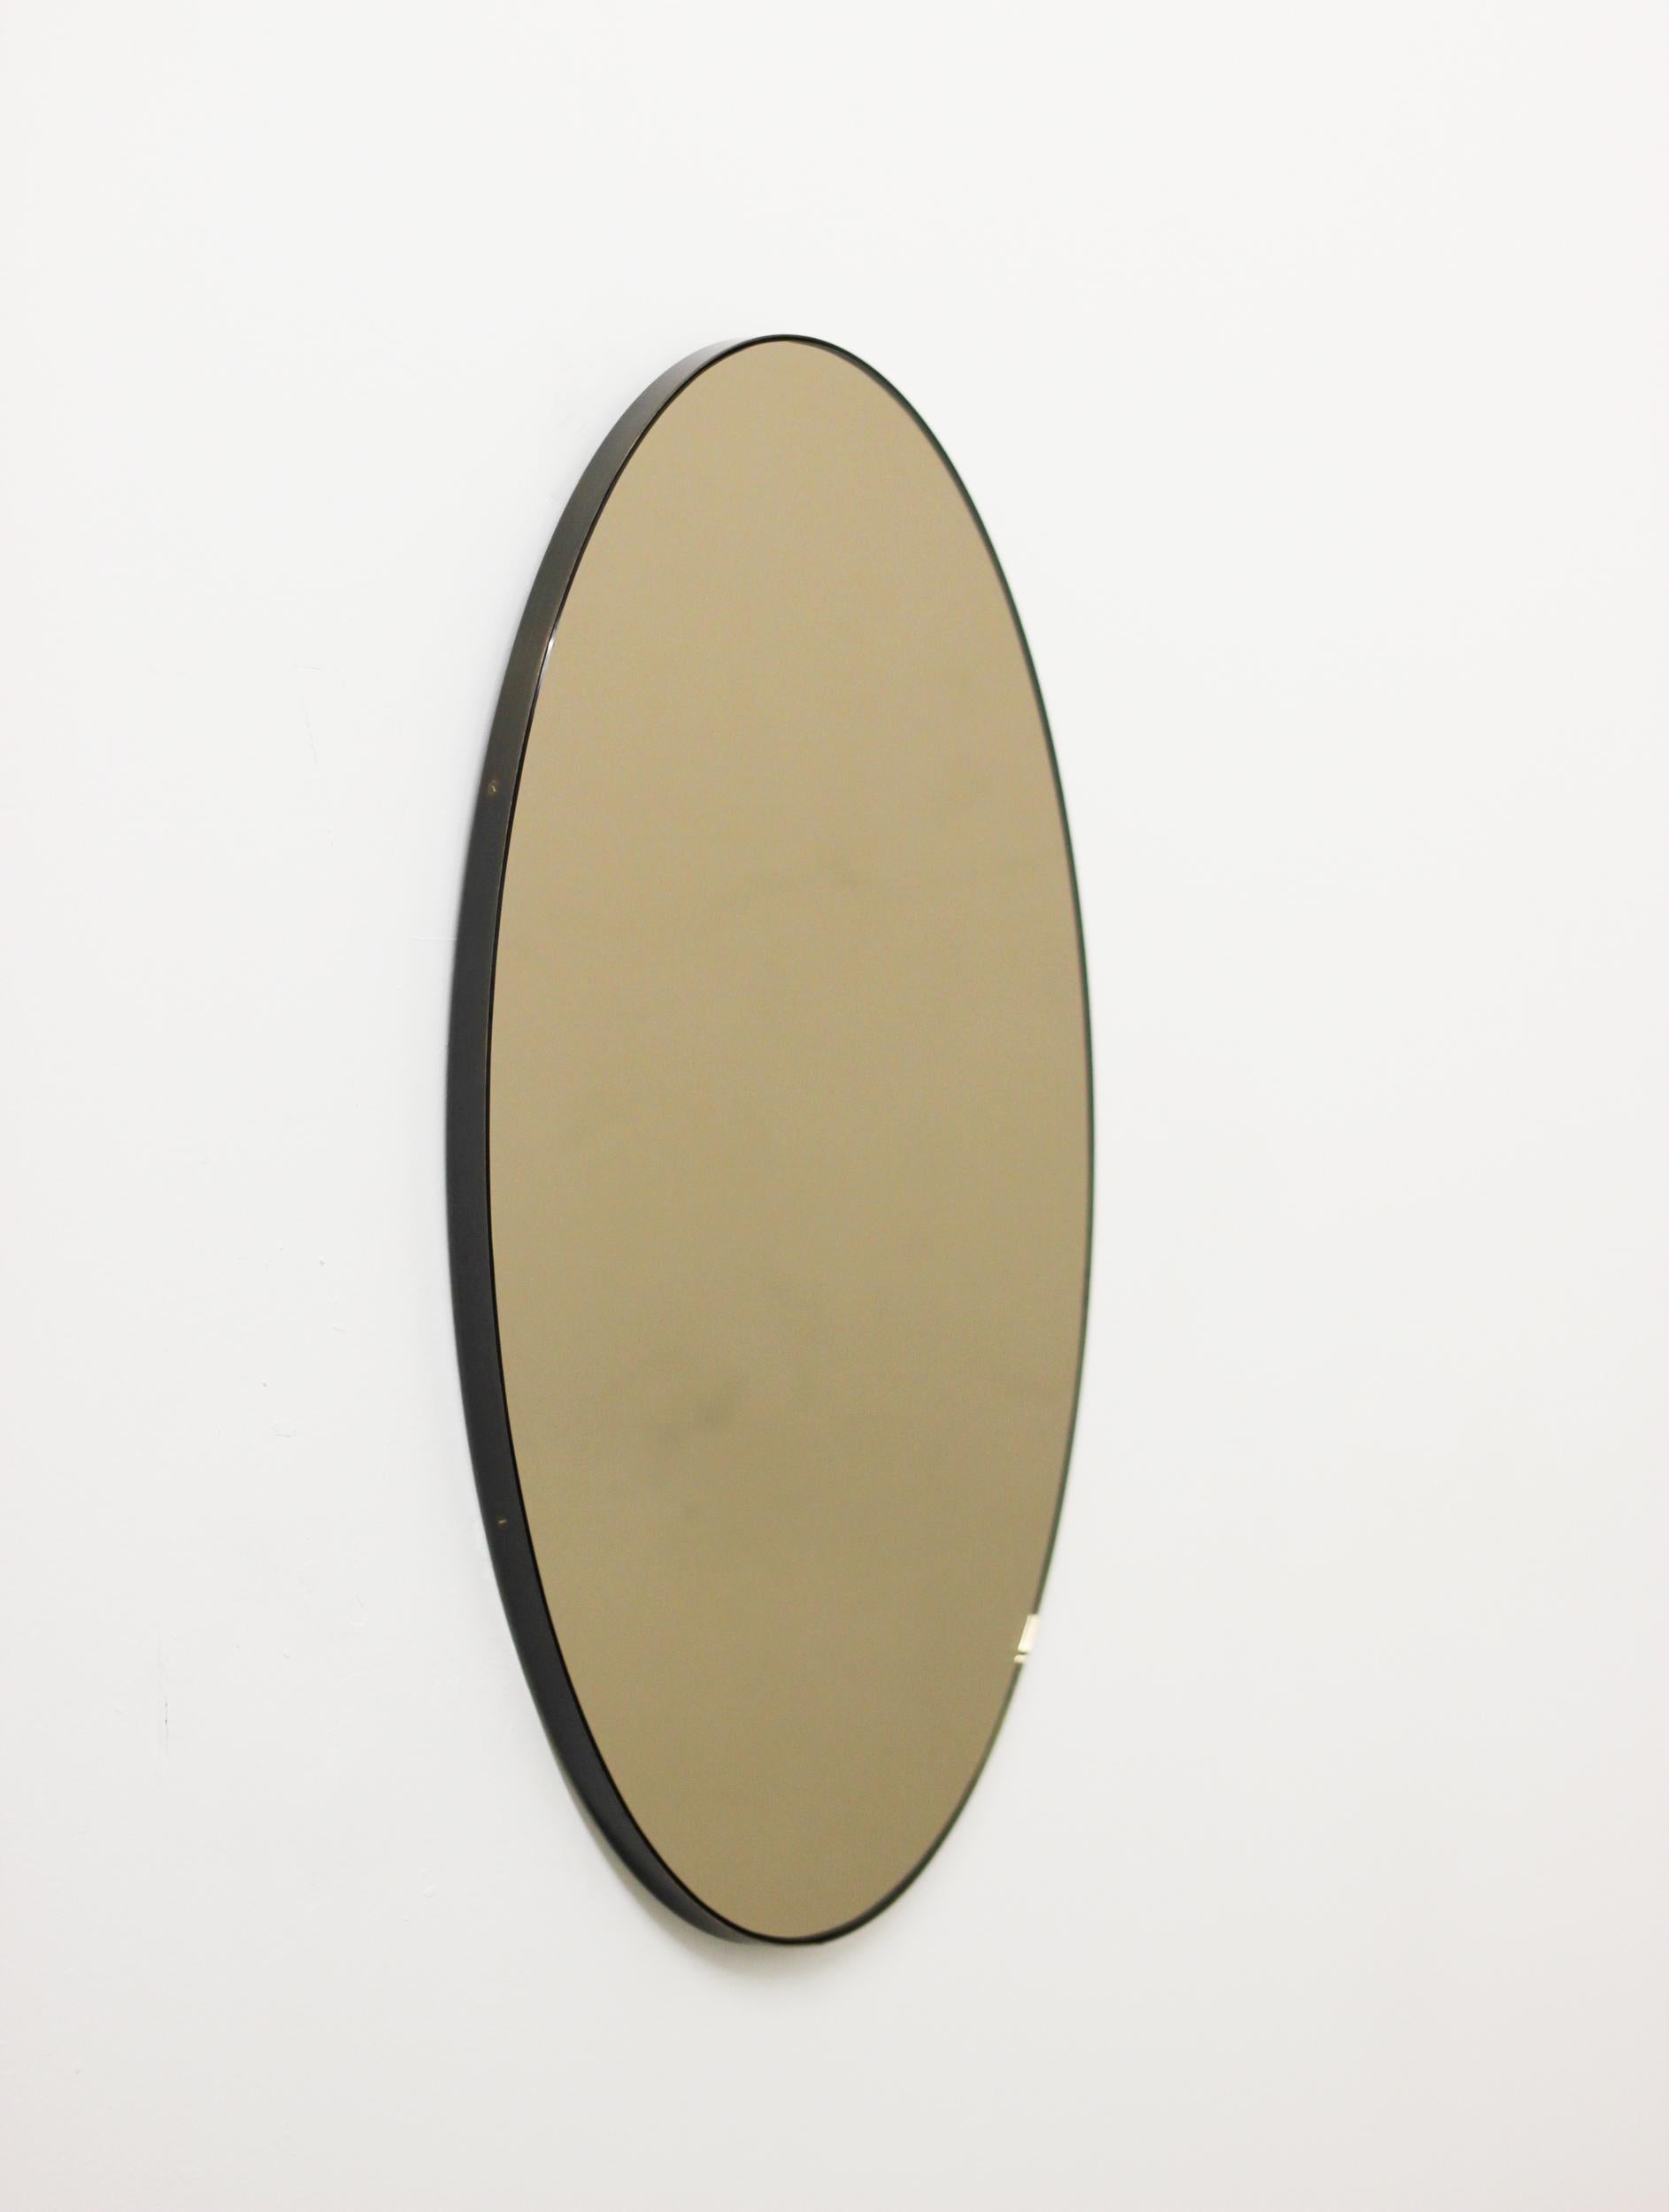 British Ovalis Oval Bronze Tinted Contemporary Mirror with Patina Frame, Small For Sale